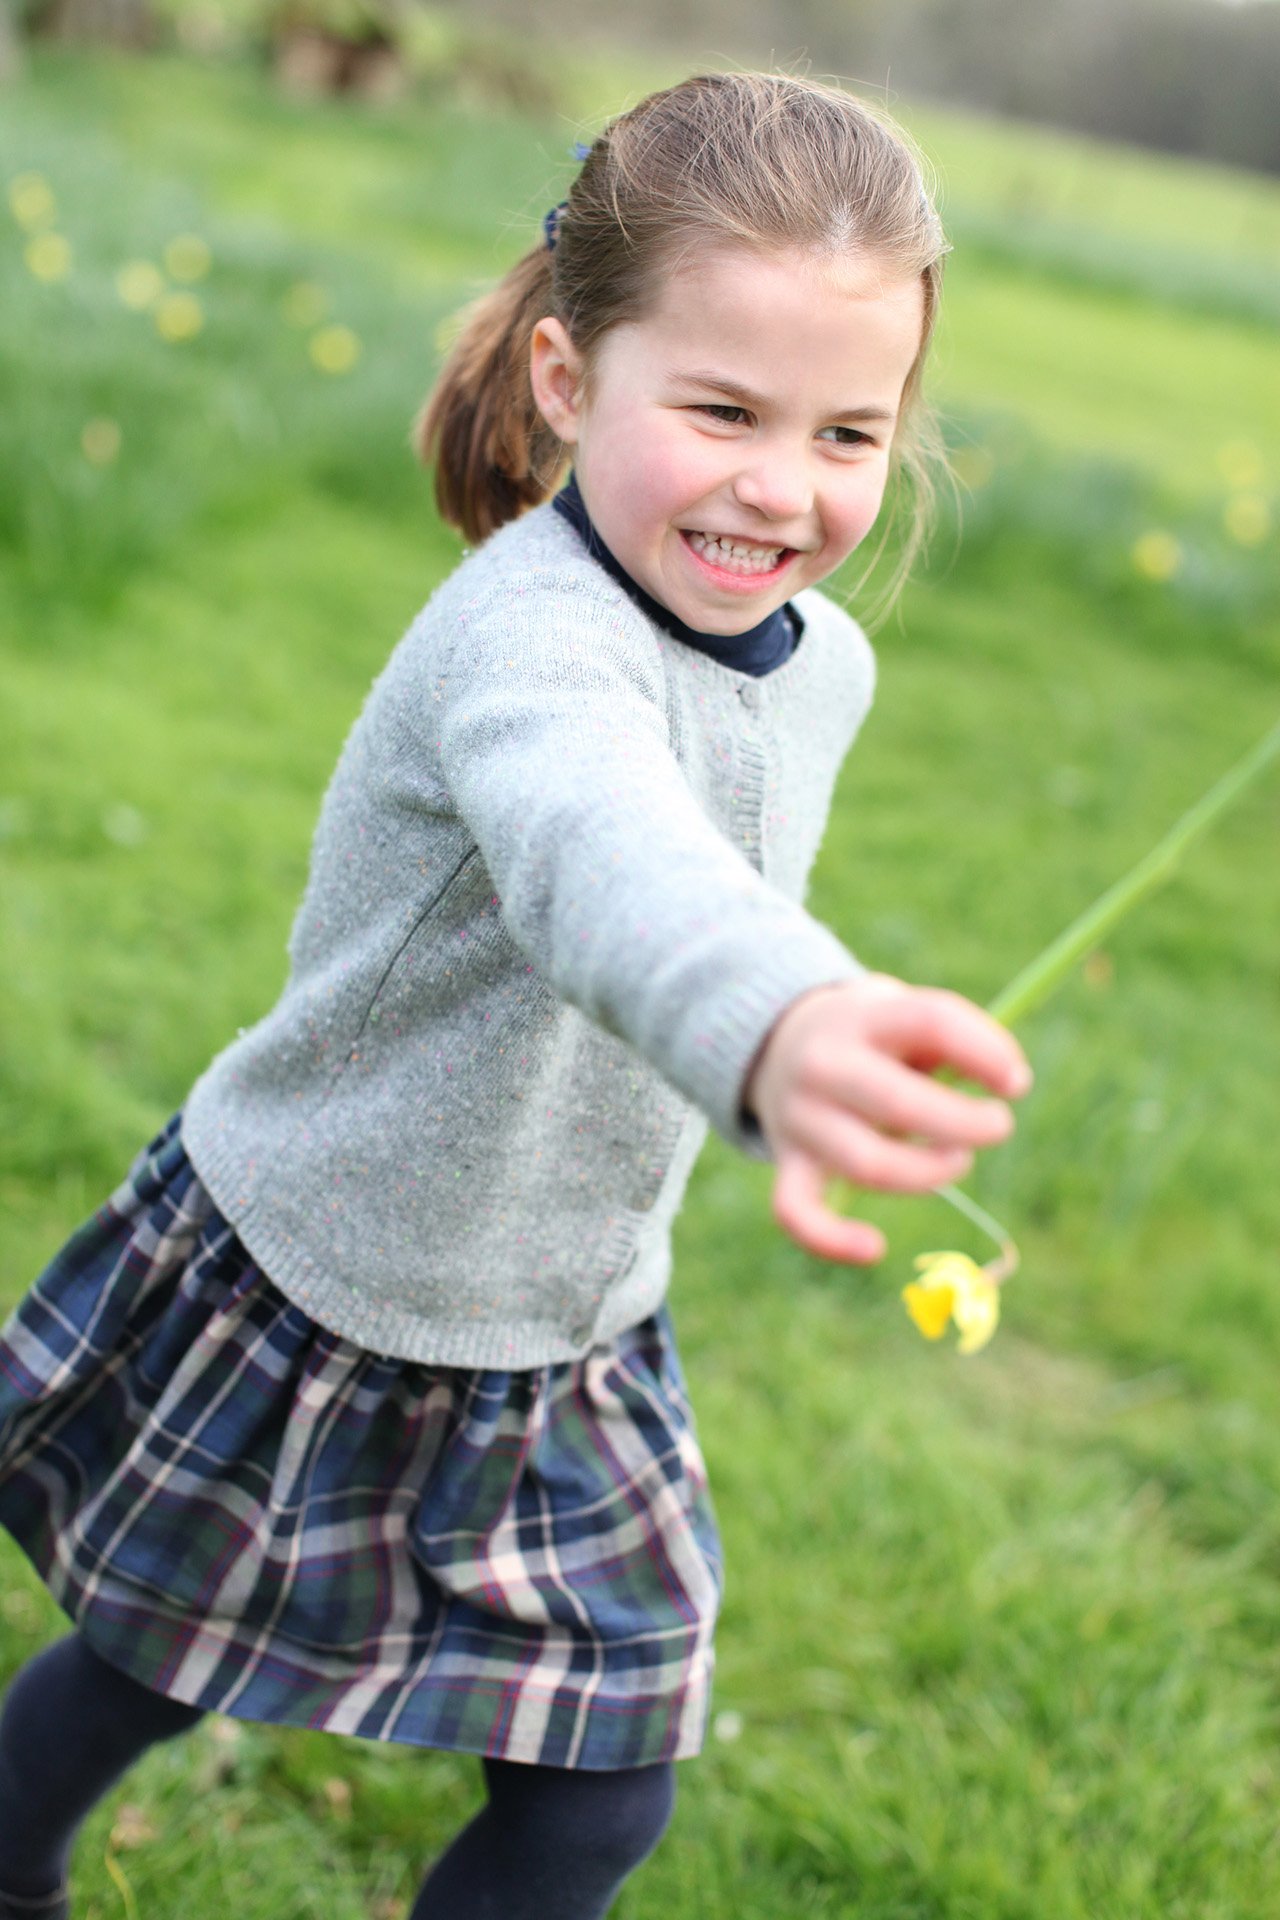 princess charlotte playing in a field